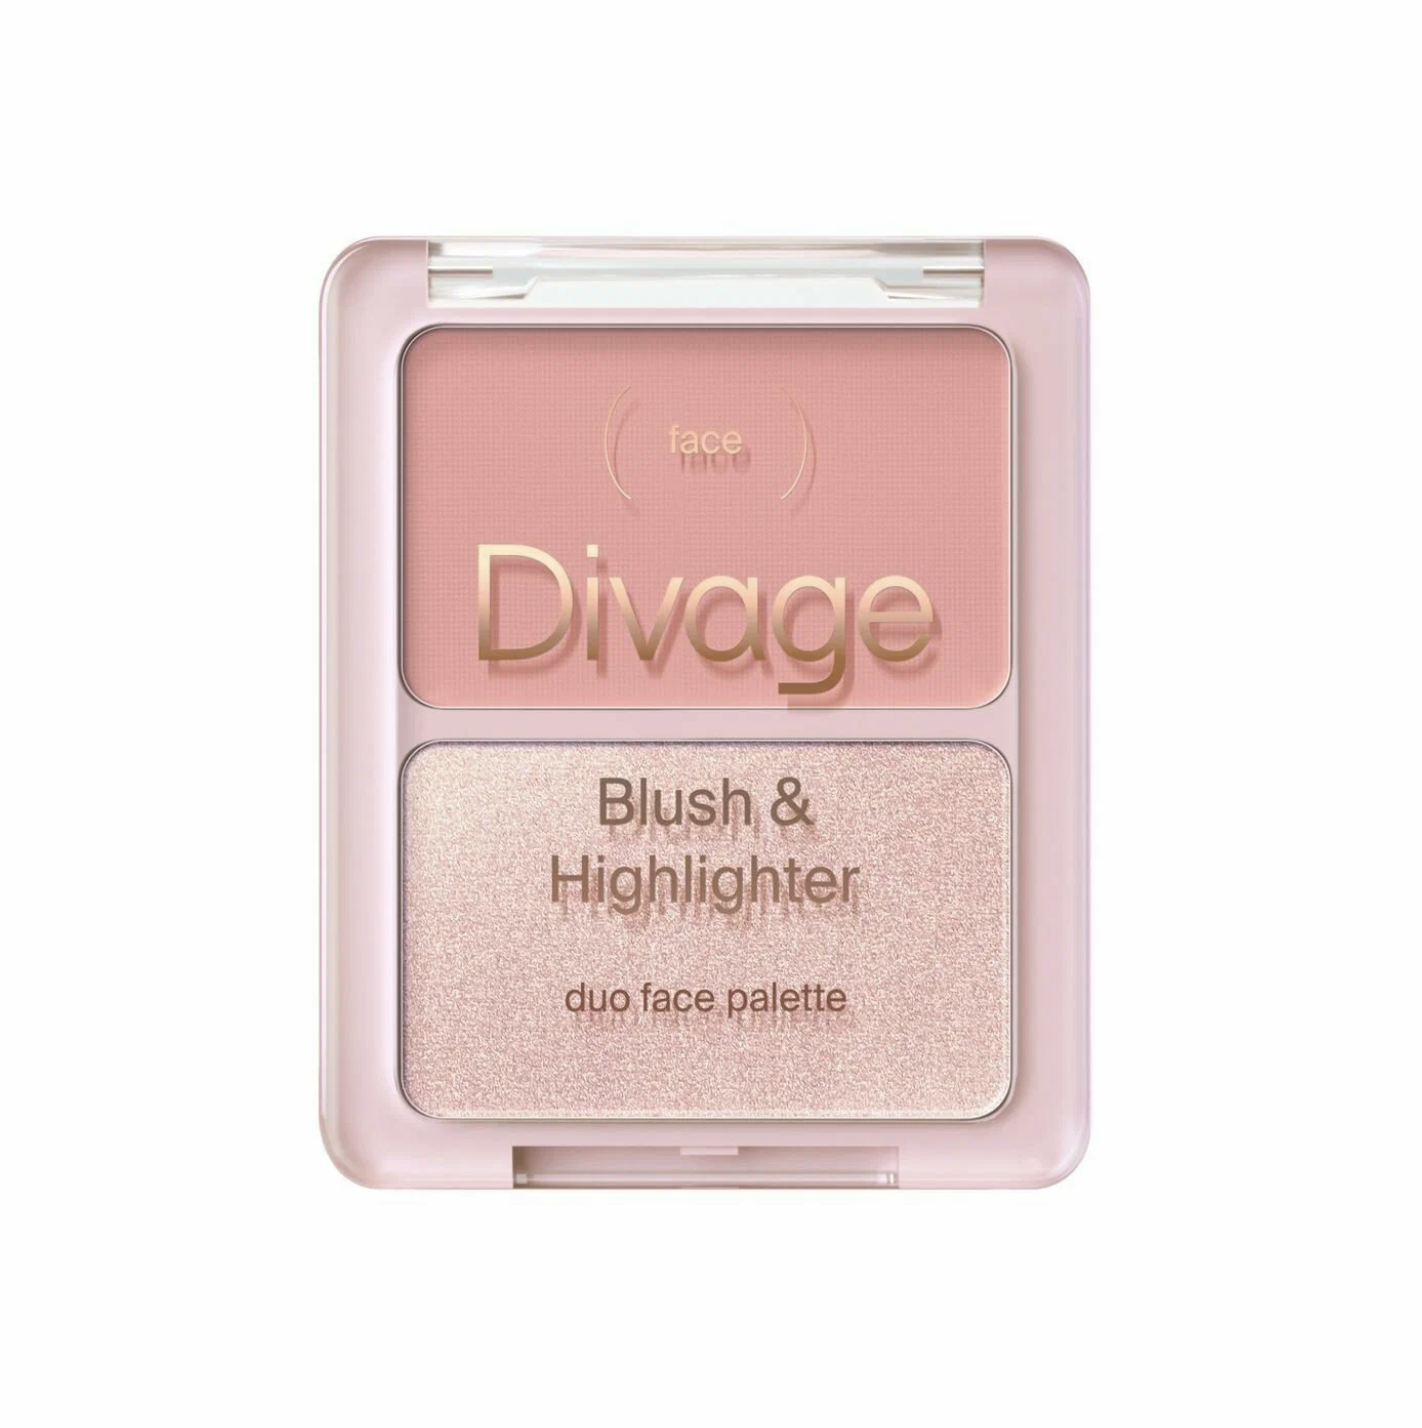   / Divage -    Blush&Highlighter Duo Face Palette  02, 8 